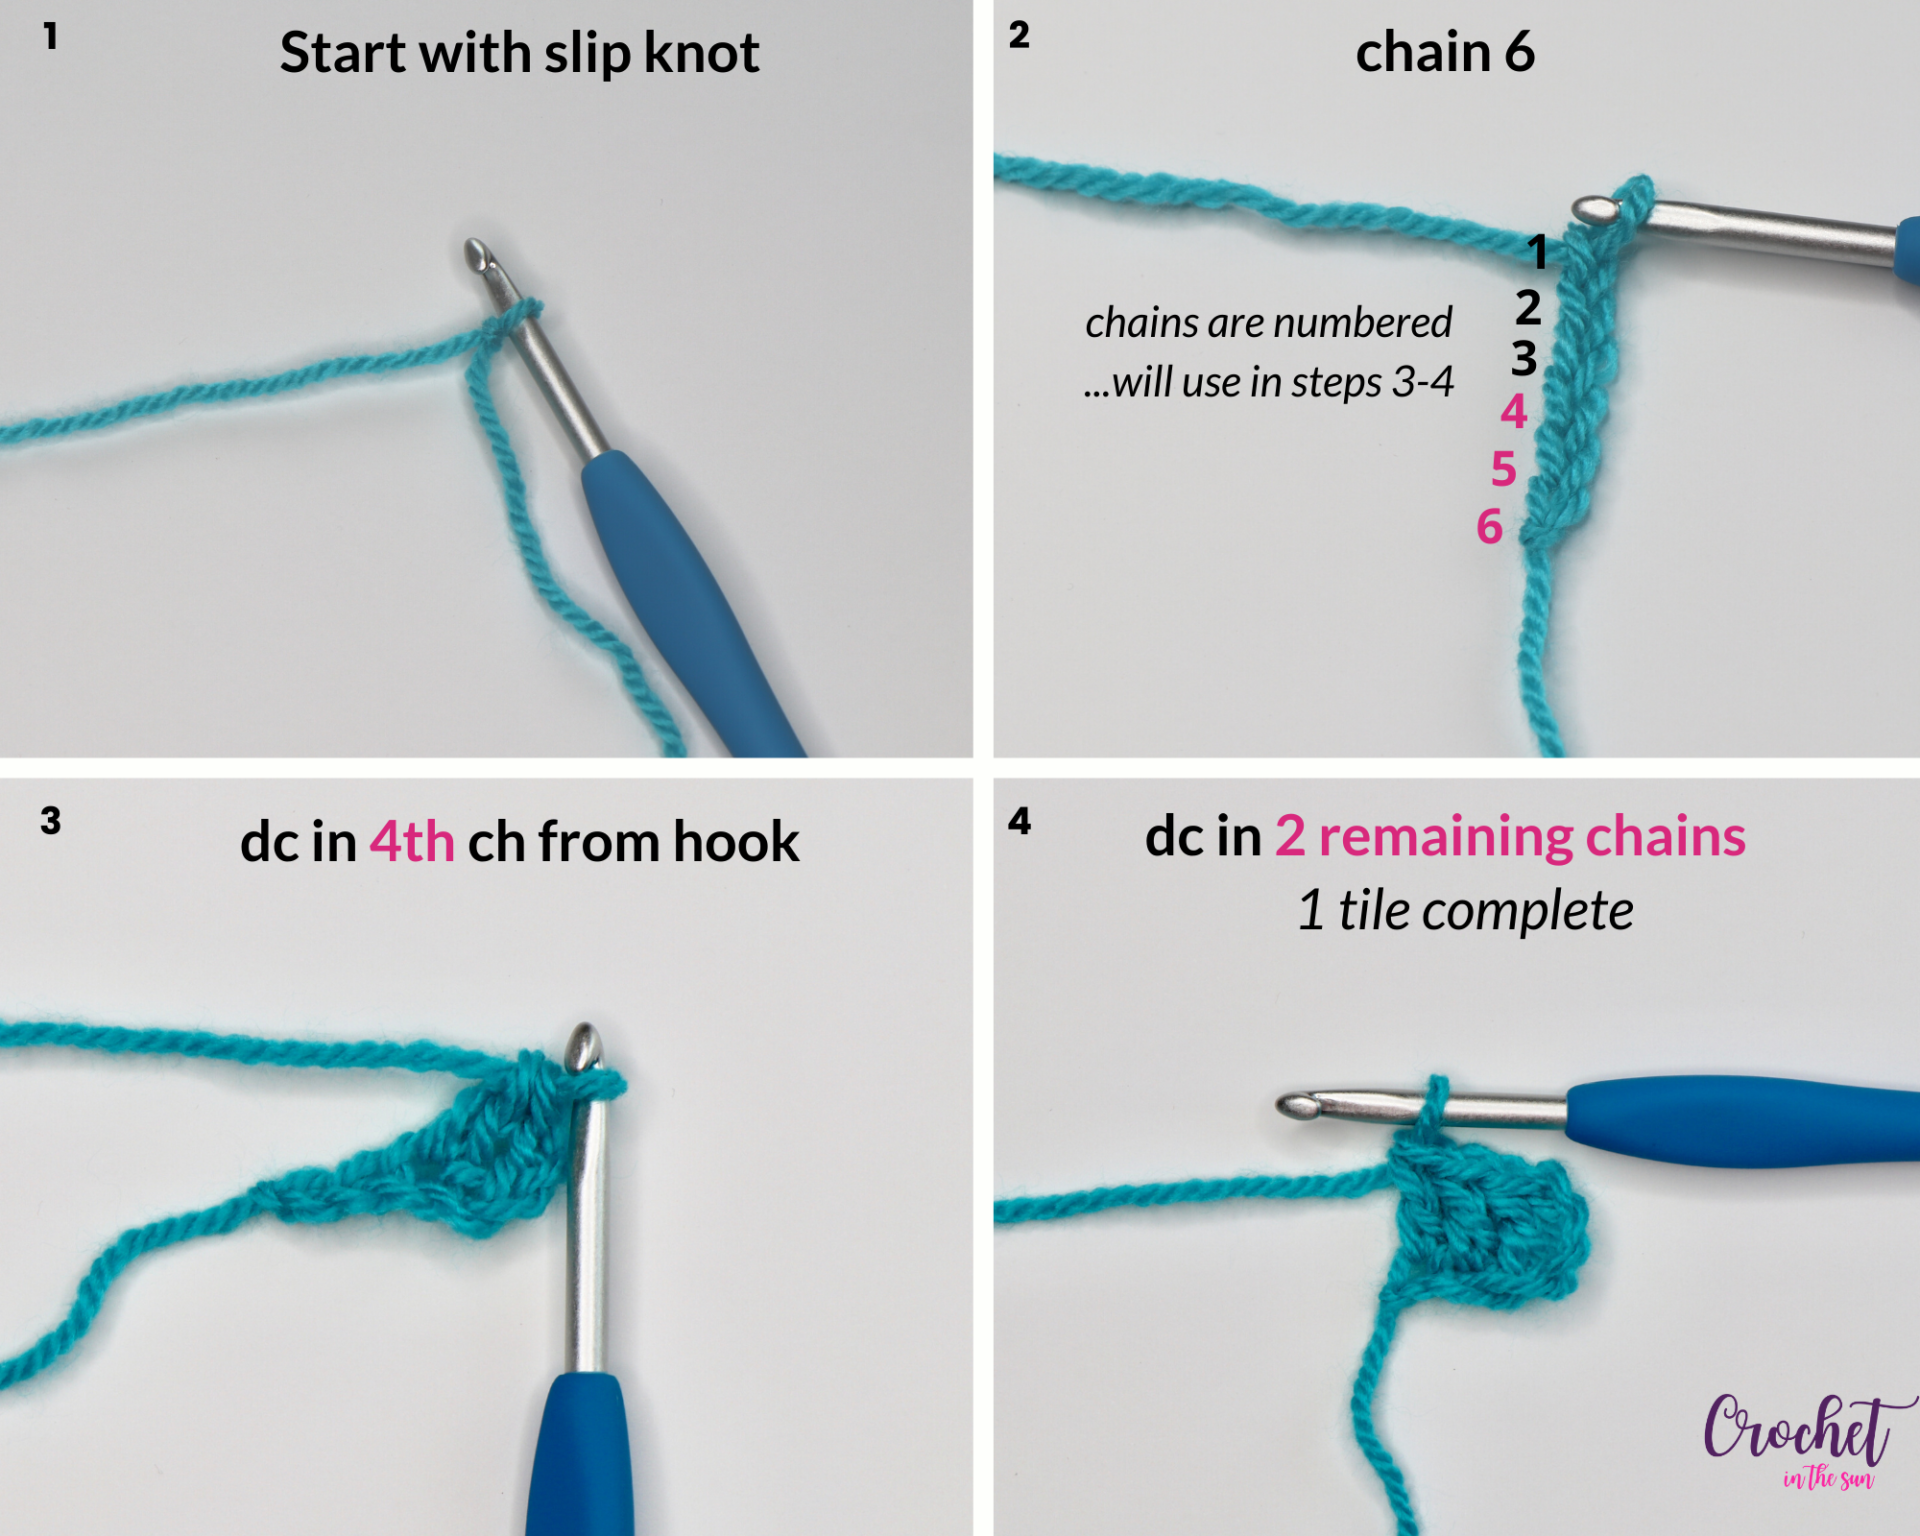 Learn how to corner to corner crochet (photo 1 of 5). This provides a clear, step-by-step photo tutorial for the c2c stitch (corner to corner stitch). This stitch is easy to learn and is beginner friendly. Learn how to crochet! There are so many c2c project ideas you will be able to complete!